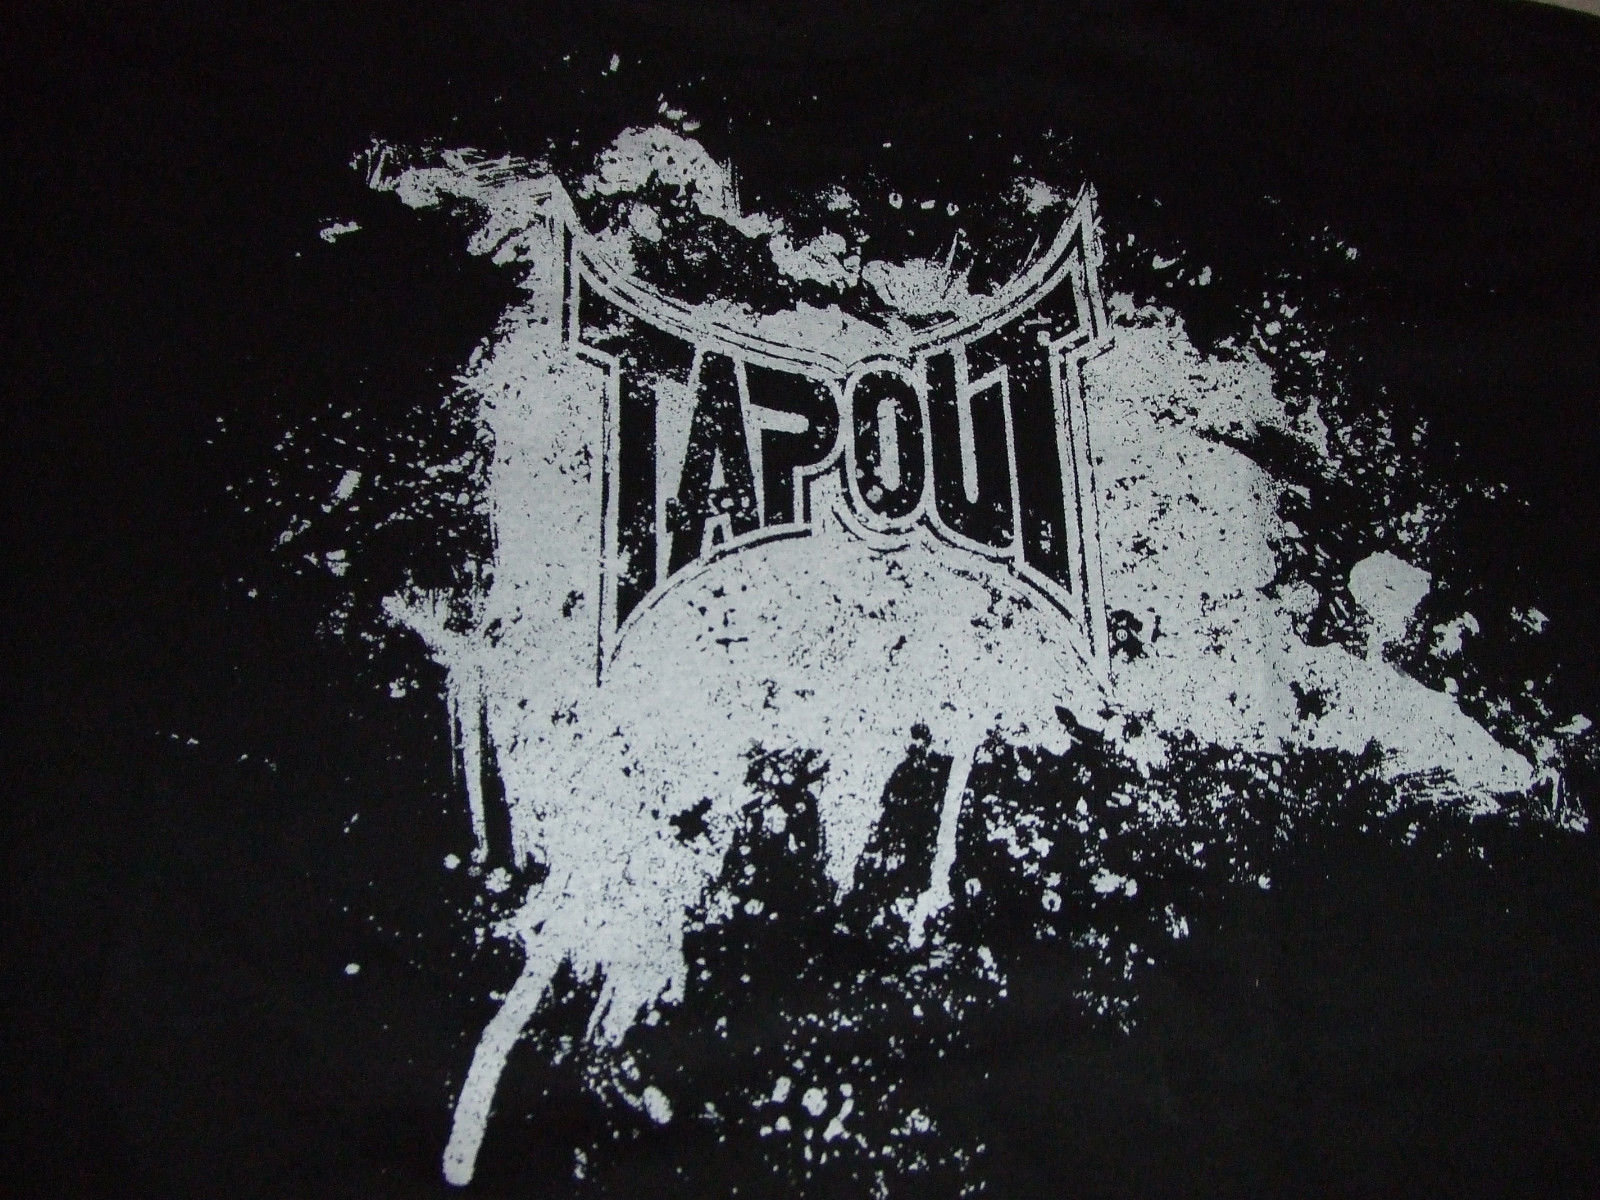 High Quality Tapout Wallpaper Full HD Pictures